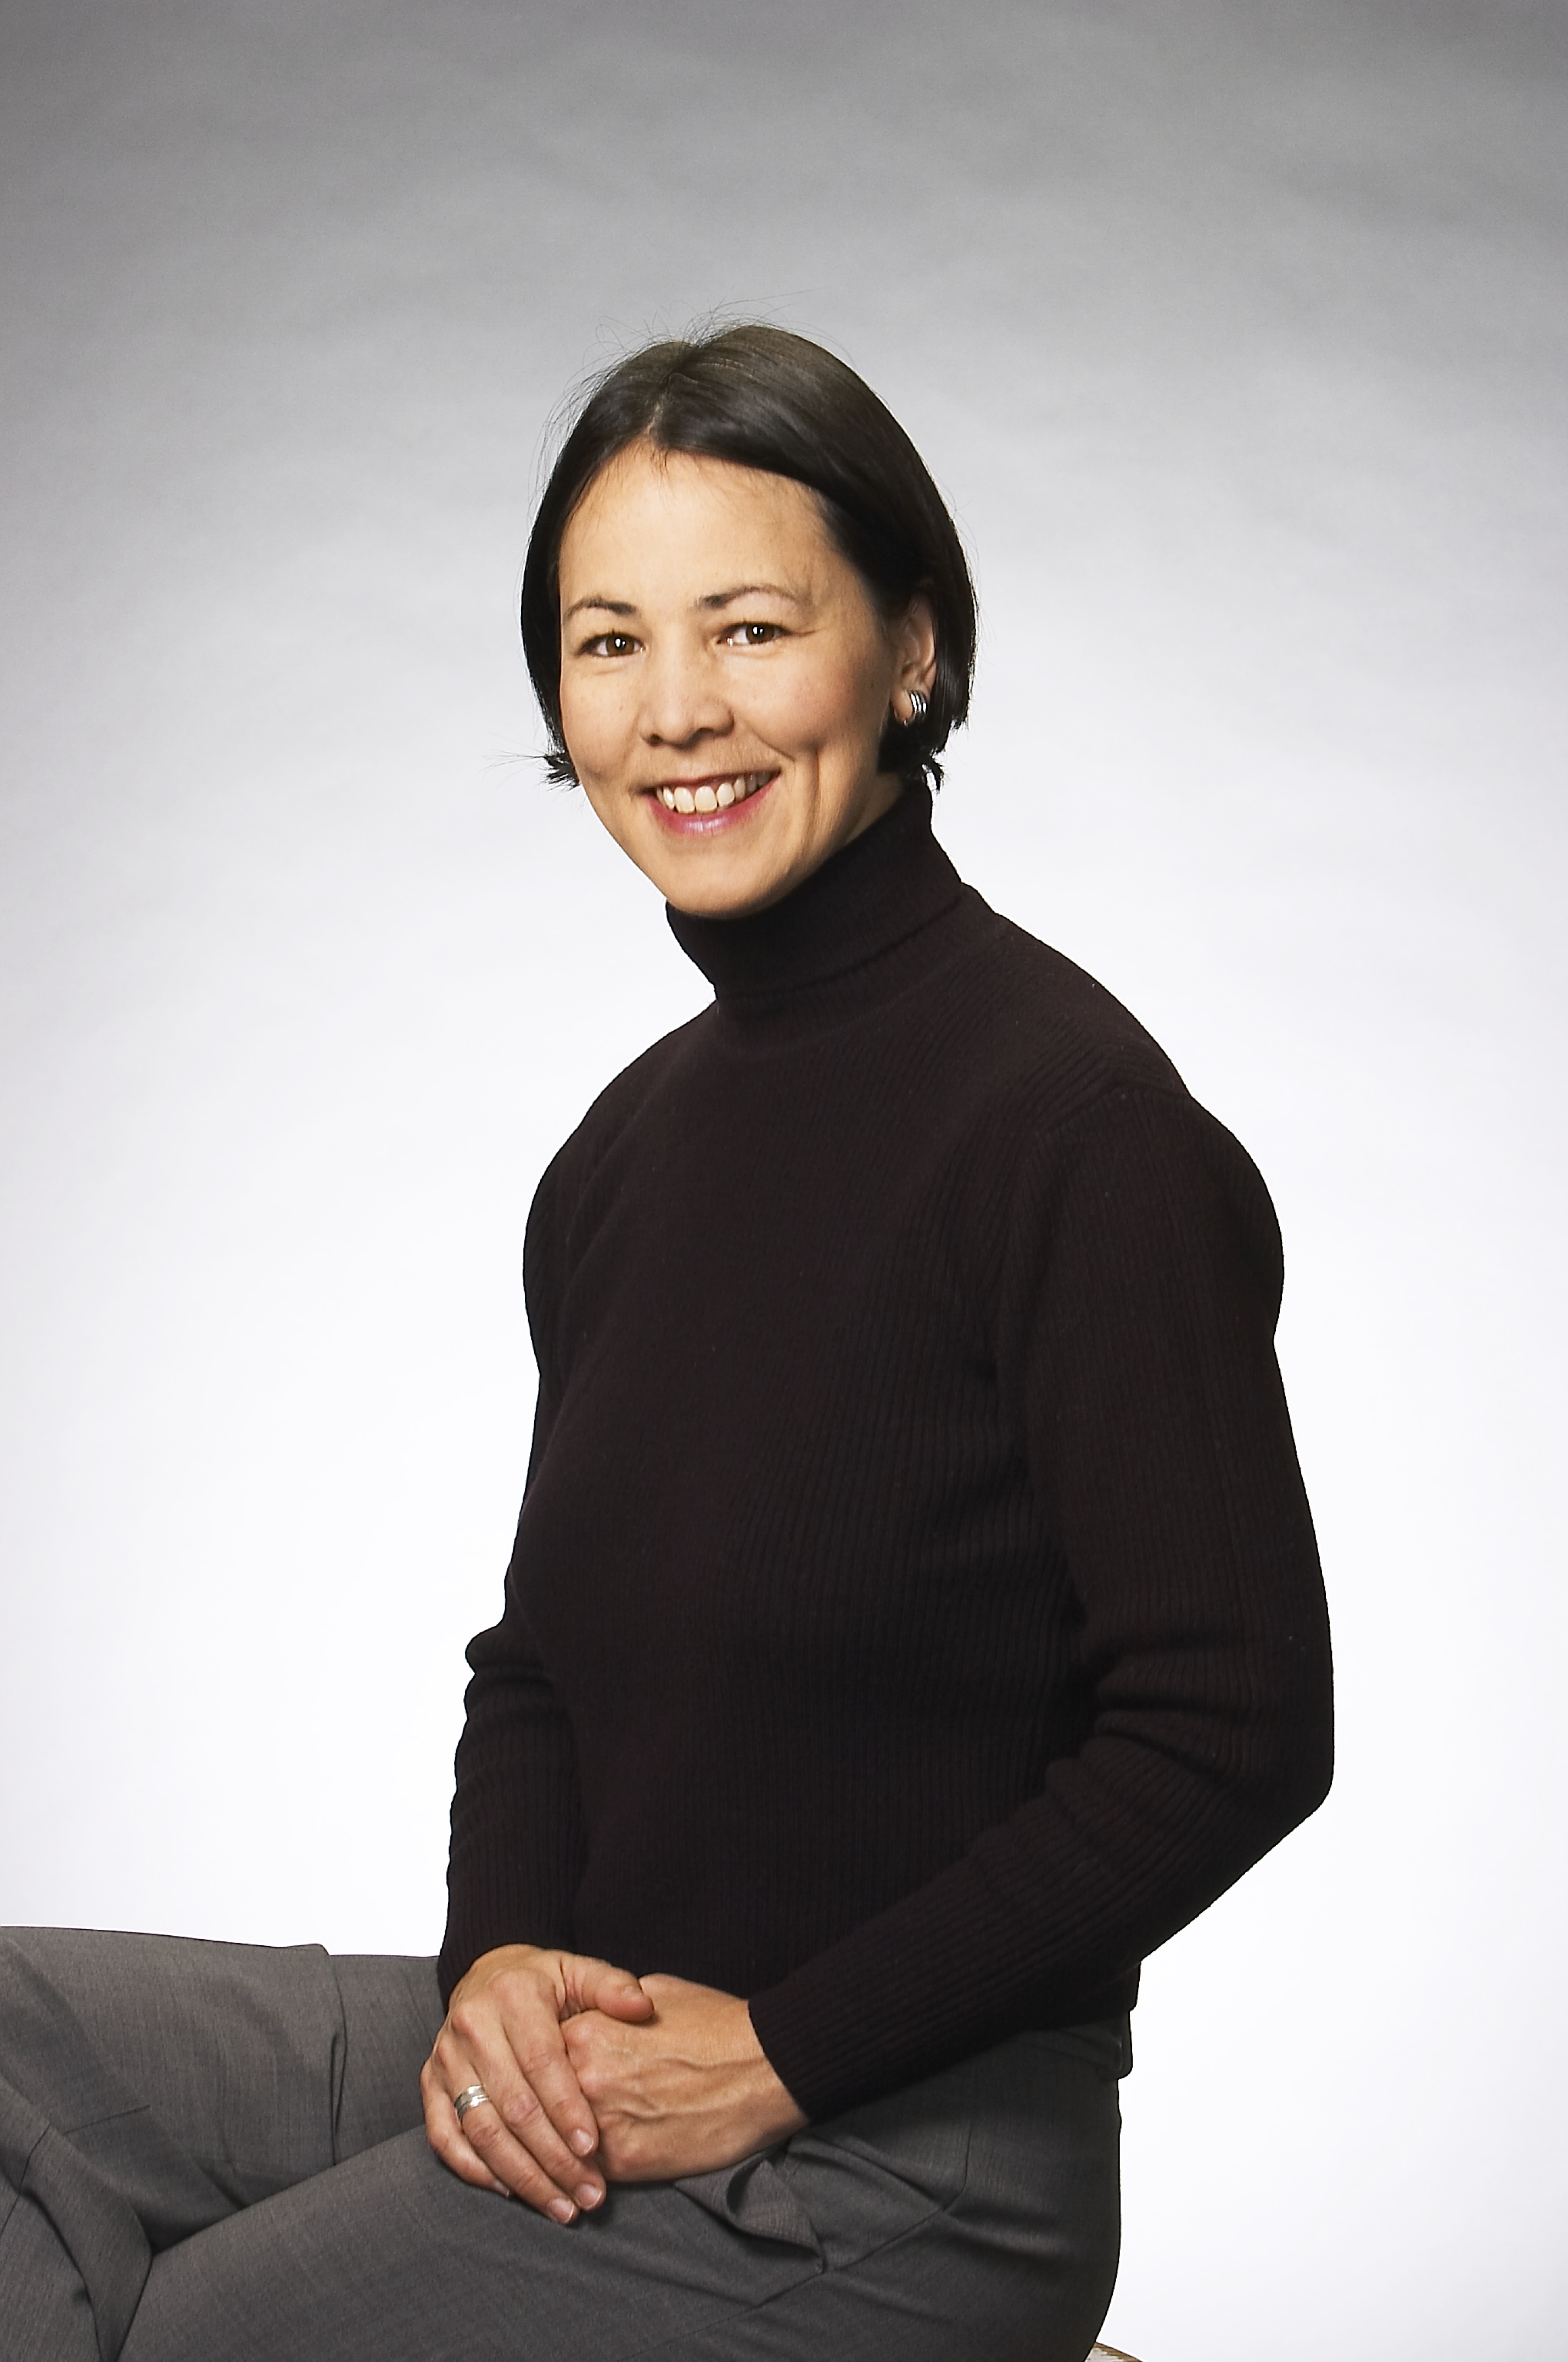 Radio announcer May-Lily Lee sitting on a stool in a pose. She is wearing a long-sleeved black turtle neck and gray pants. She is smiling and her hands are resting one atop the other on her leg.